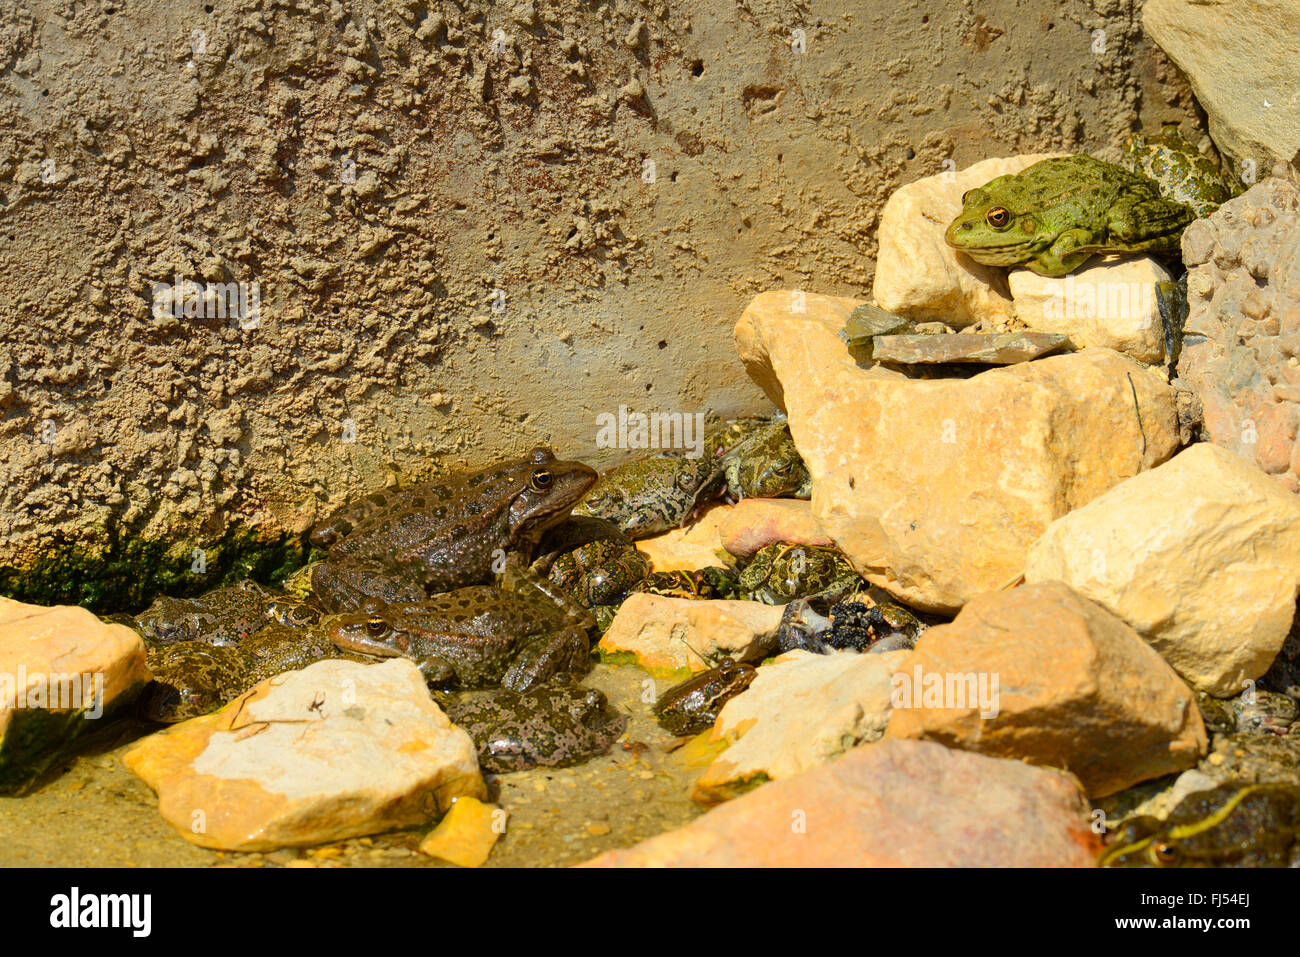 frogs and toads fallen in an open slot in danger to dry out, Romania Stock Photo